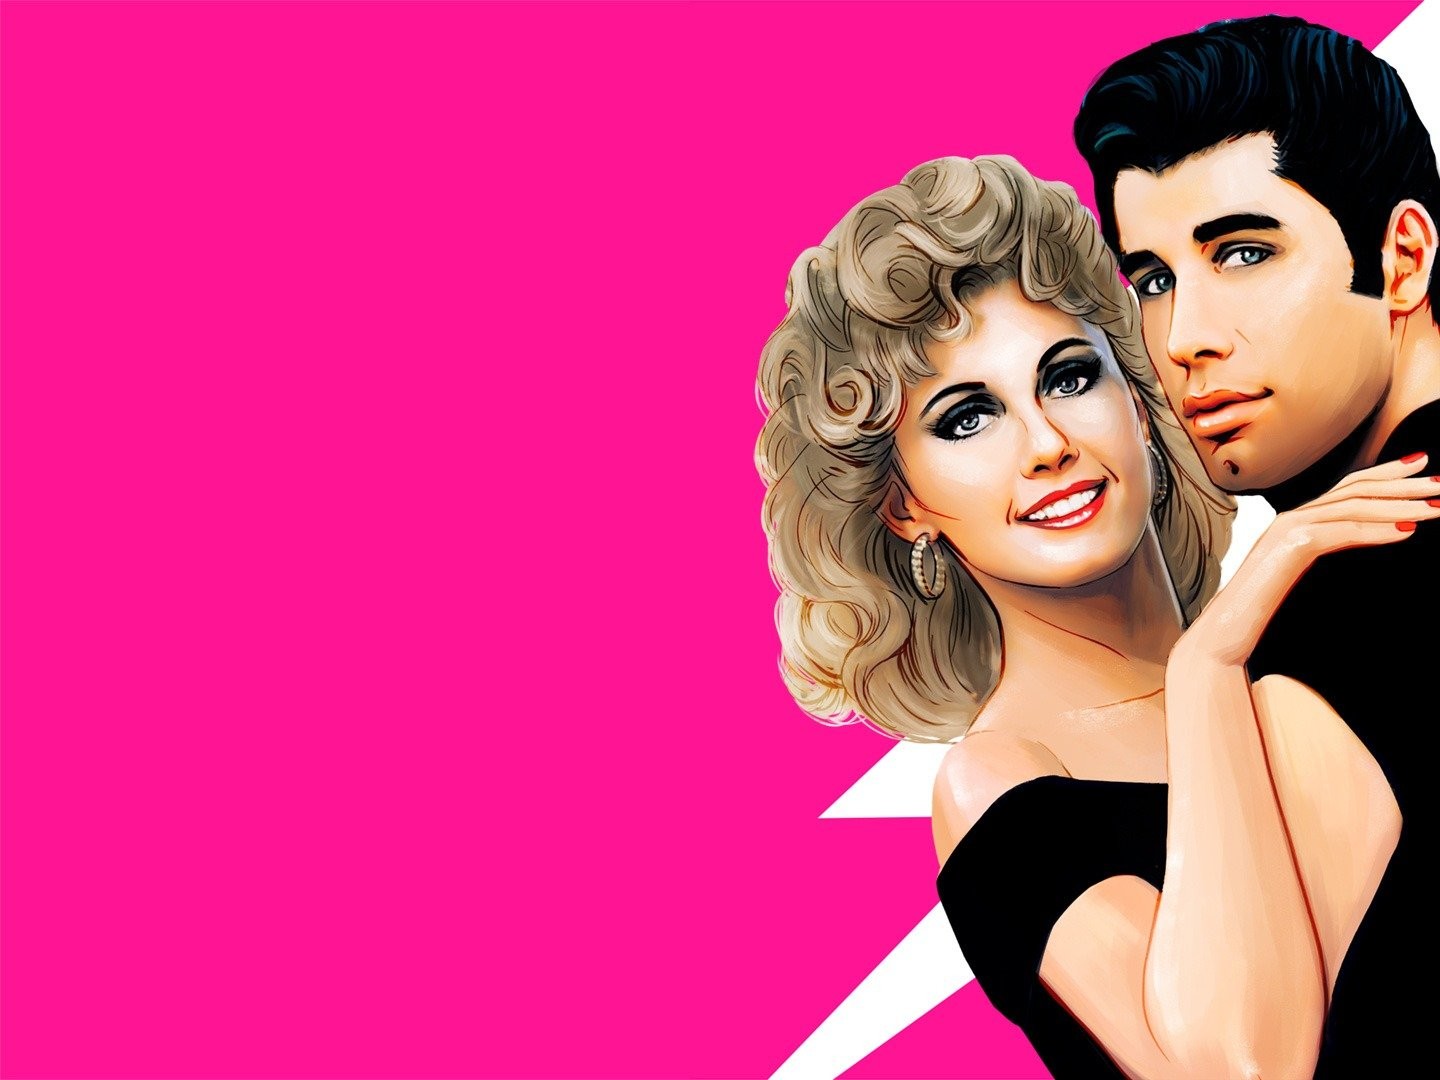 Grease Wallpapers  Wallpaper Cave